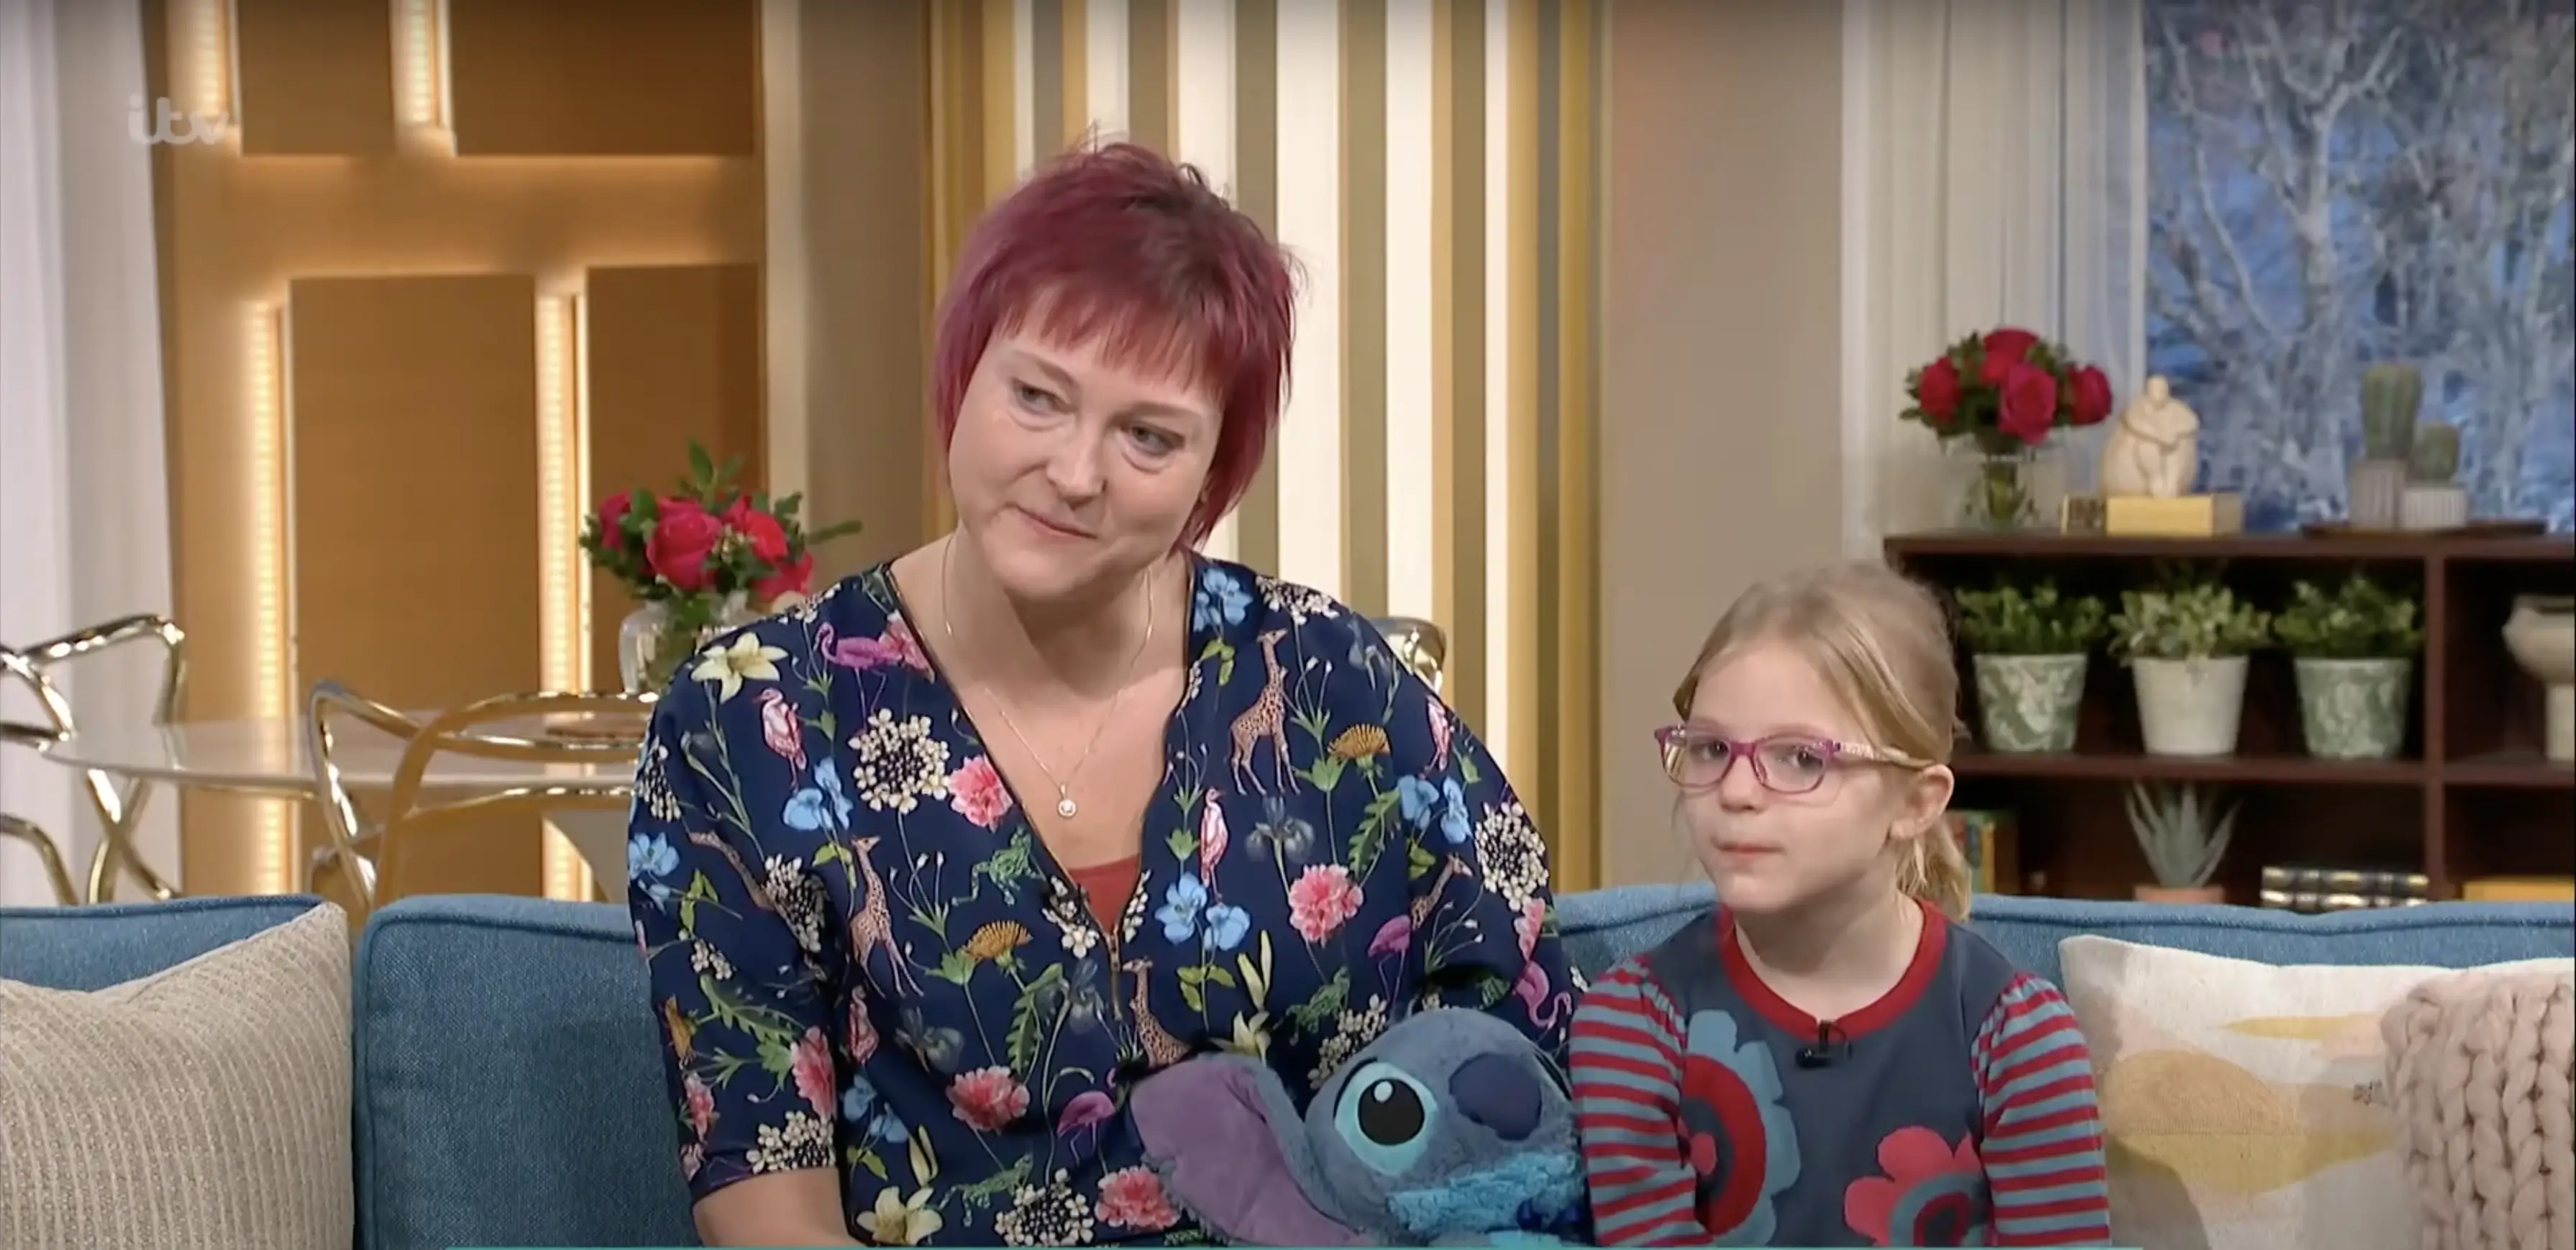 Aimee and Daisy Hamer während eines Interviews in "This Morning" am 14. Januar 2024 | Quelle: YouTube/ThisMorning